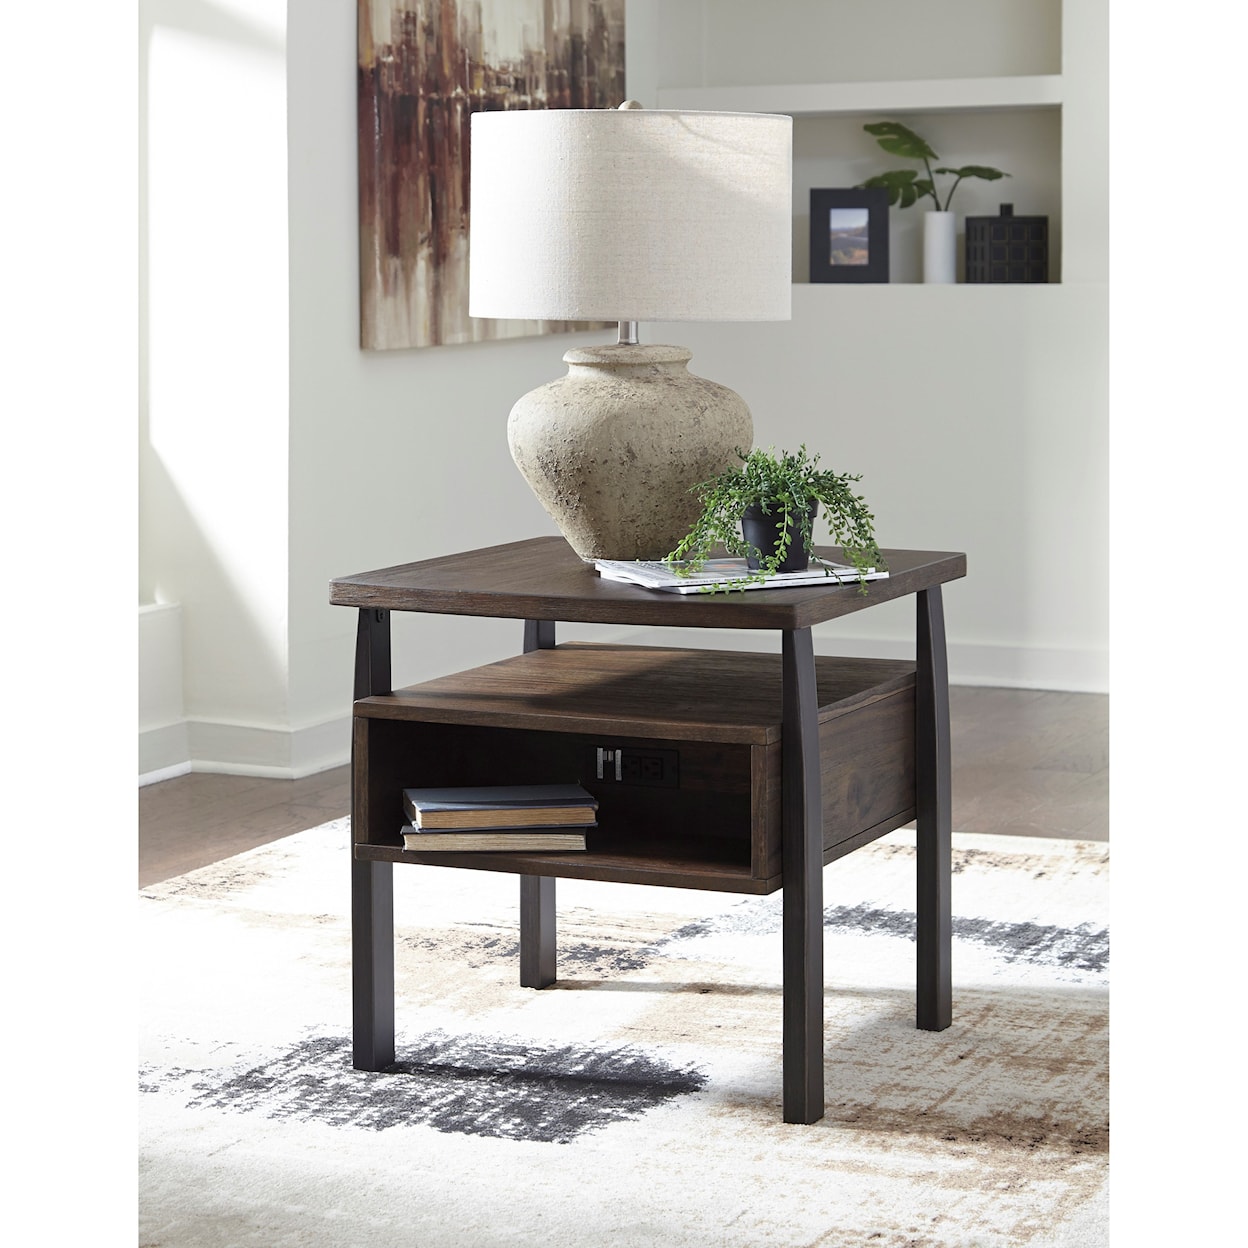 Signature Design by Ashley Vailbry End Table